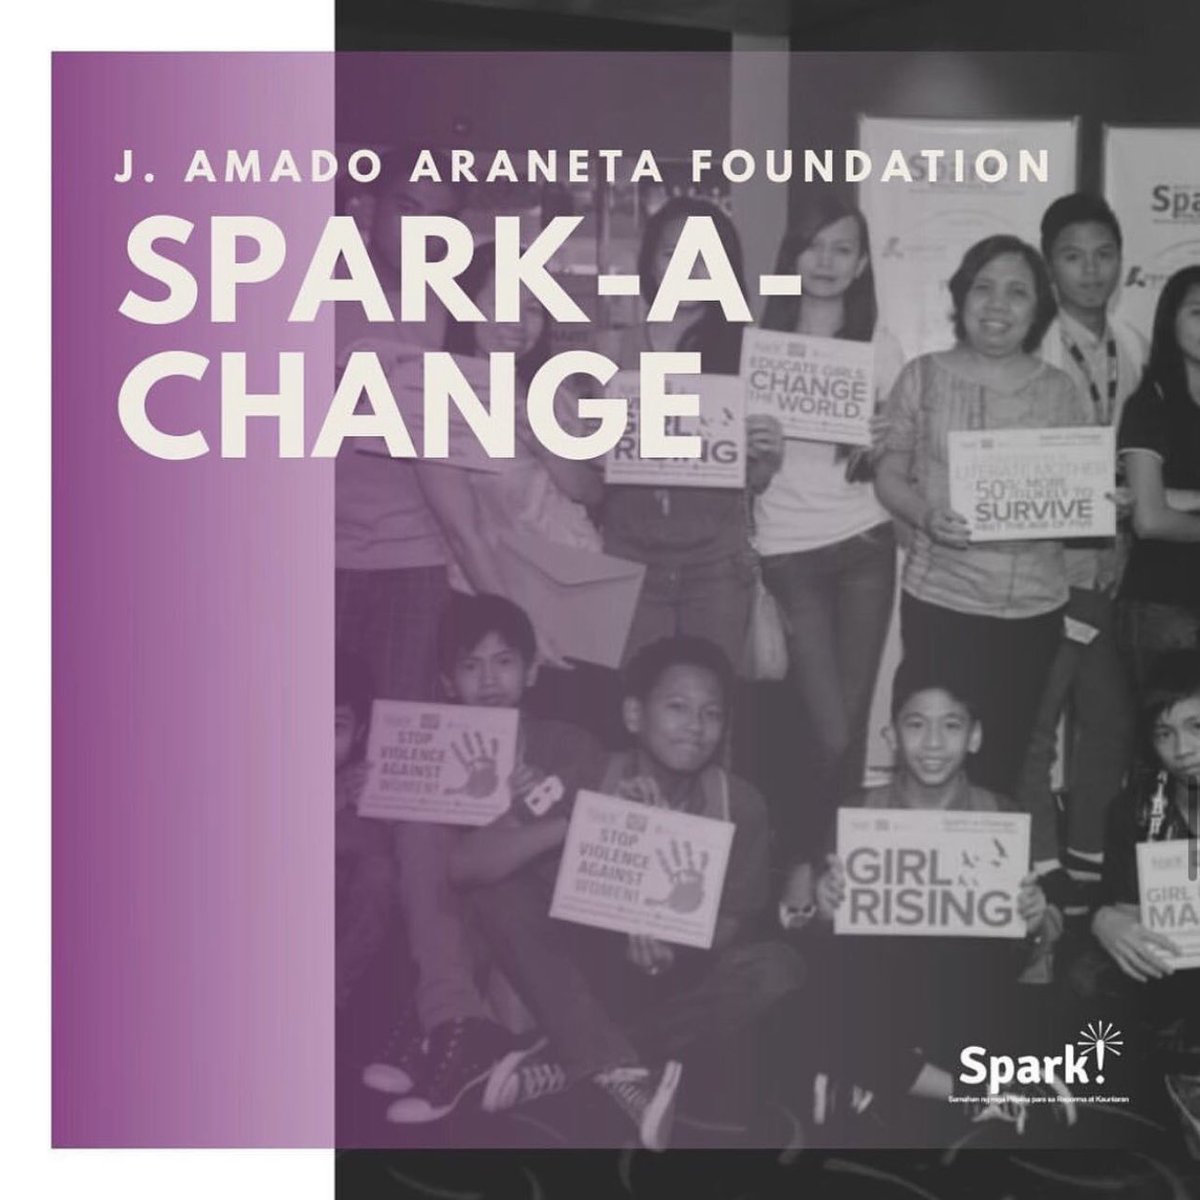 In 2013, SPARK! partnered with J. Amado Araneta Foundation to implement a 2 year program called SPARK-a-Change which aimed to empower women and girls by screening the film Girl Rising in their communities and schools encouraging men and boys to be supporters of gender equality.